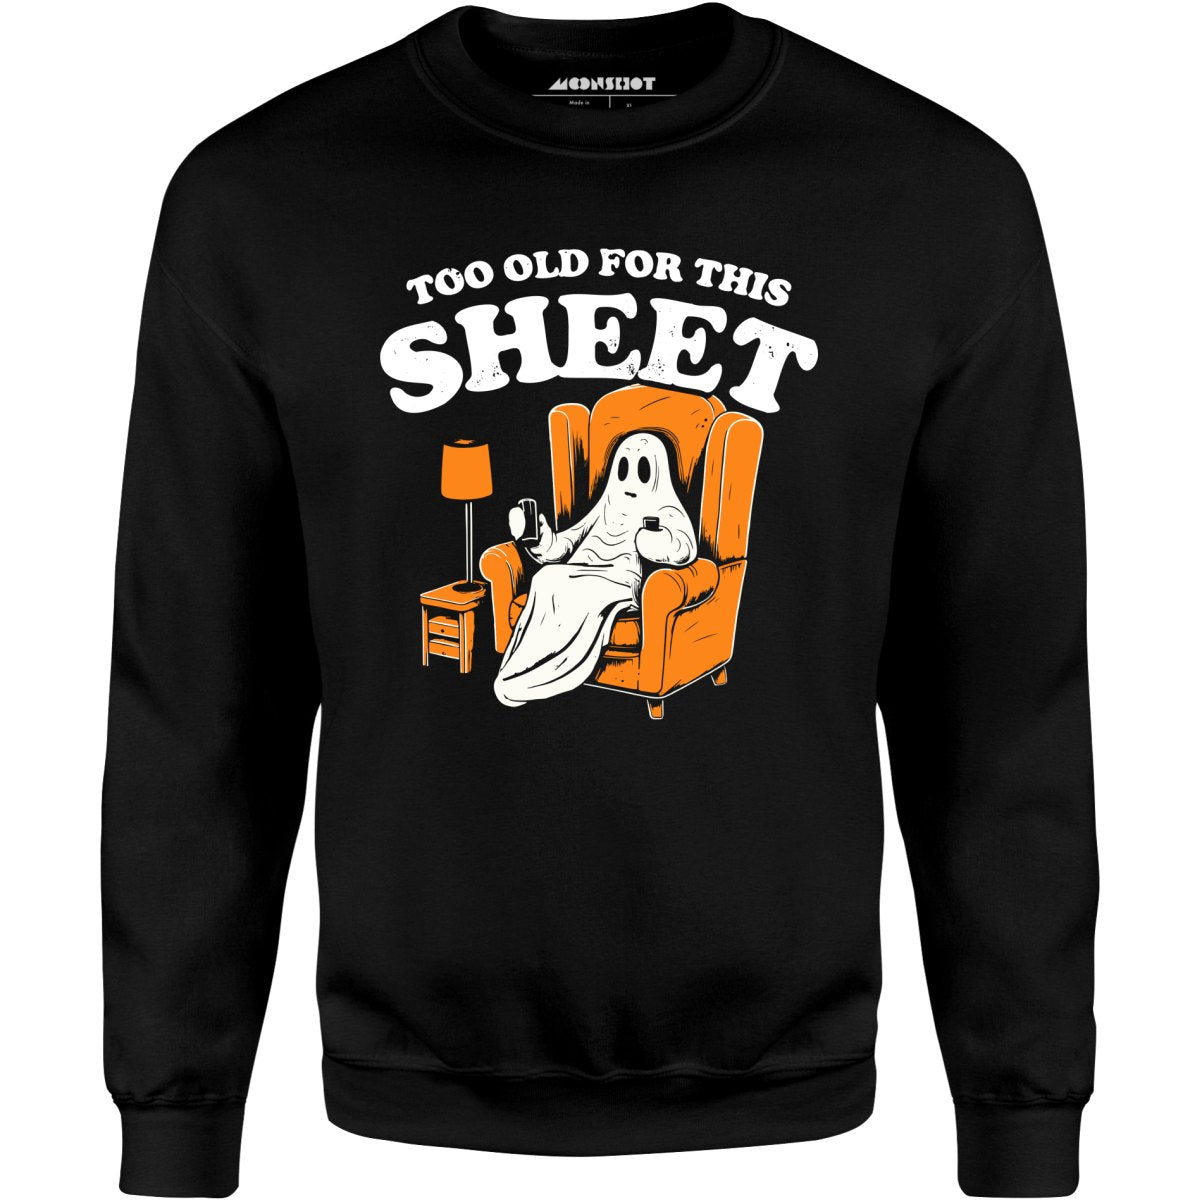 Too Old For This Sheet - Unisex Sweatshirt